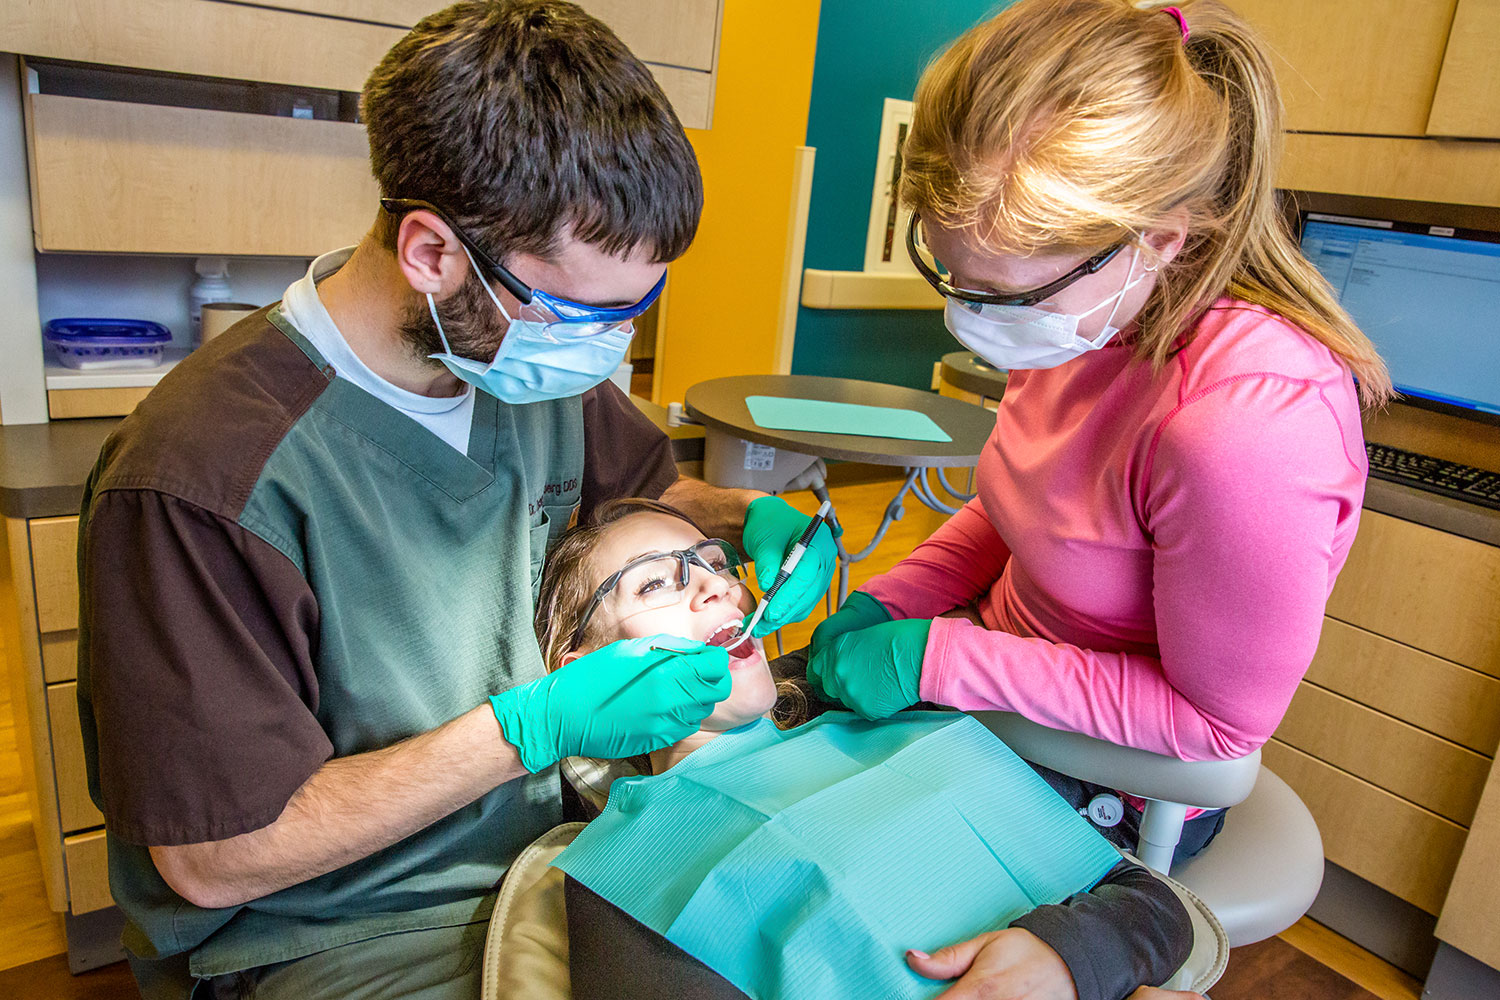 A photograph of a dentist working on patient at Bullhook Community Medical Center in Havre, Montana while on commercial assignment for the Montana Community Development Corporation.